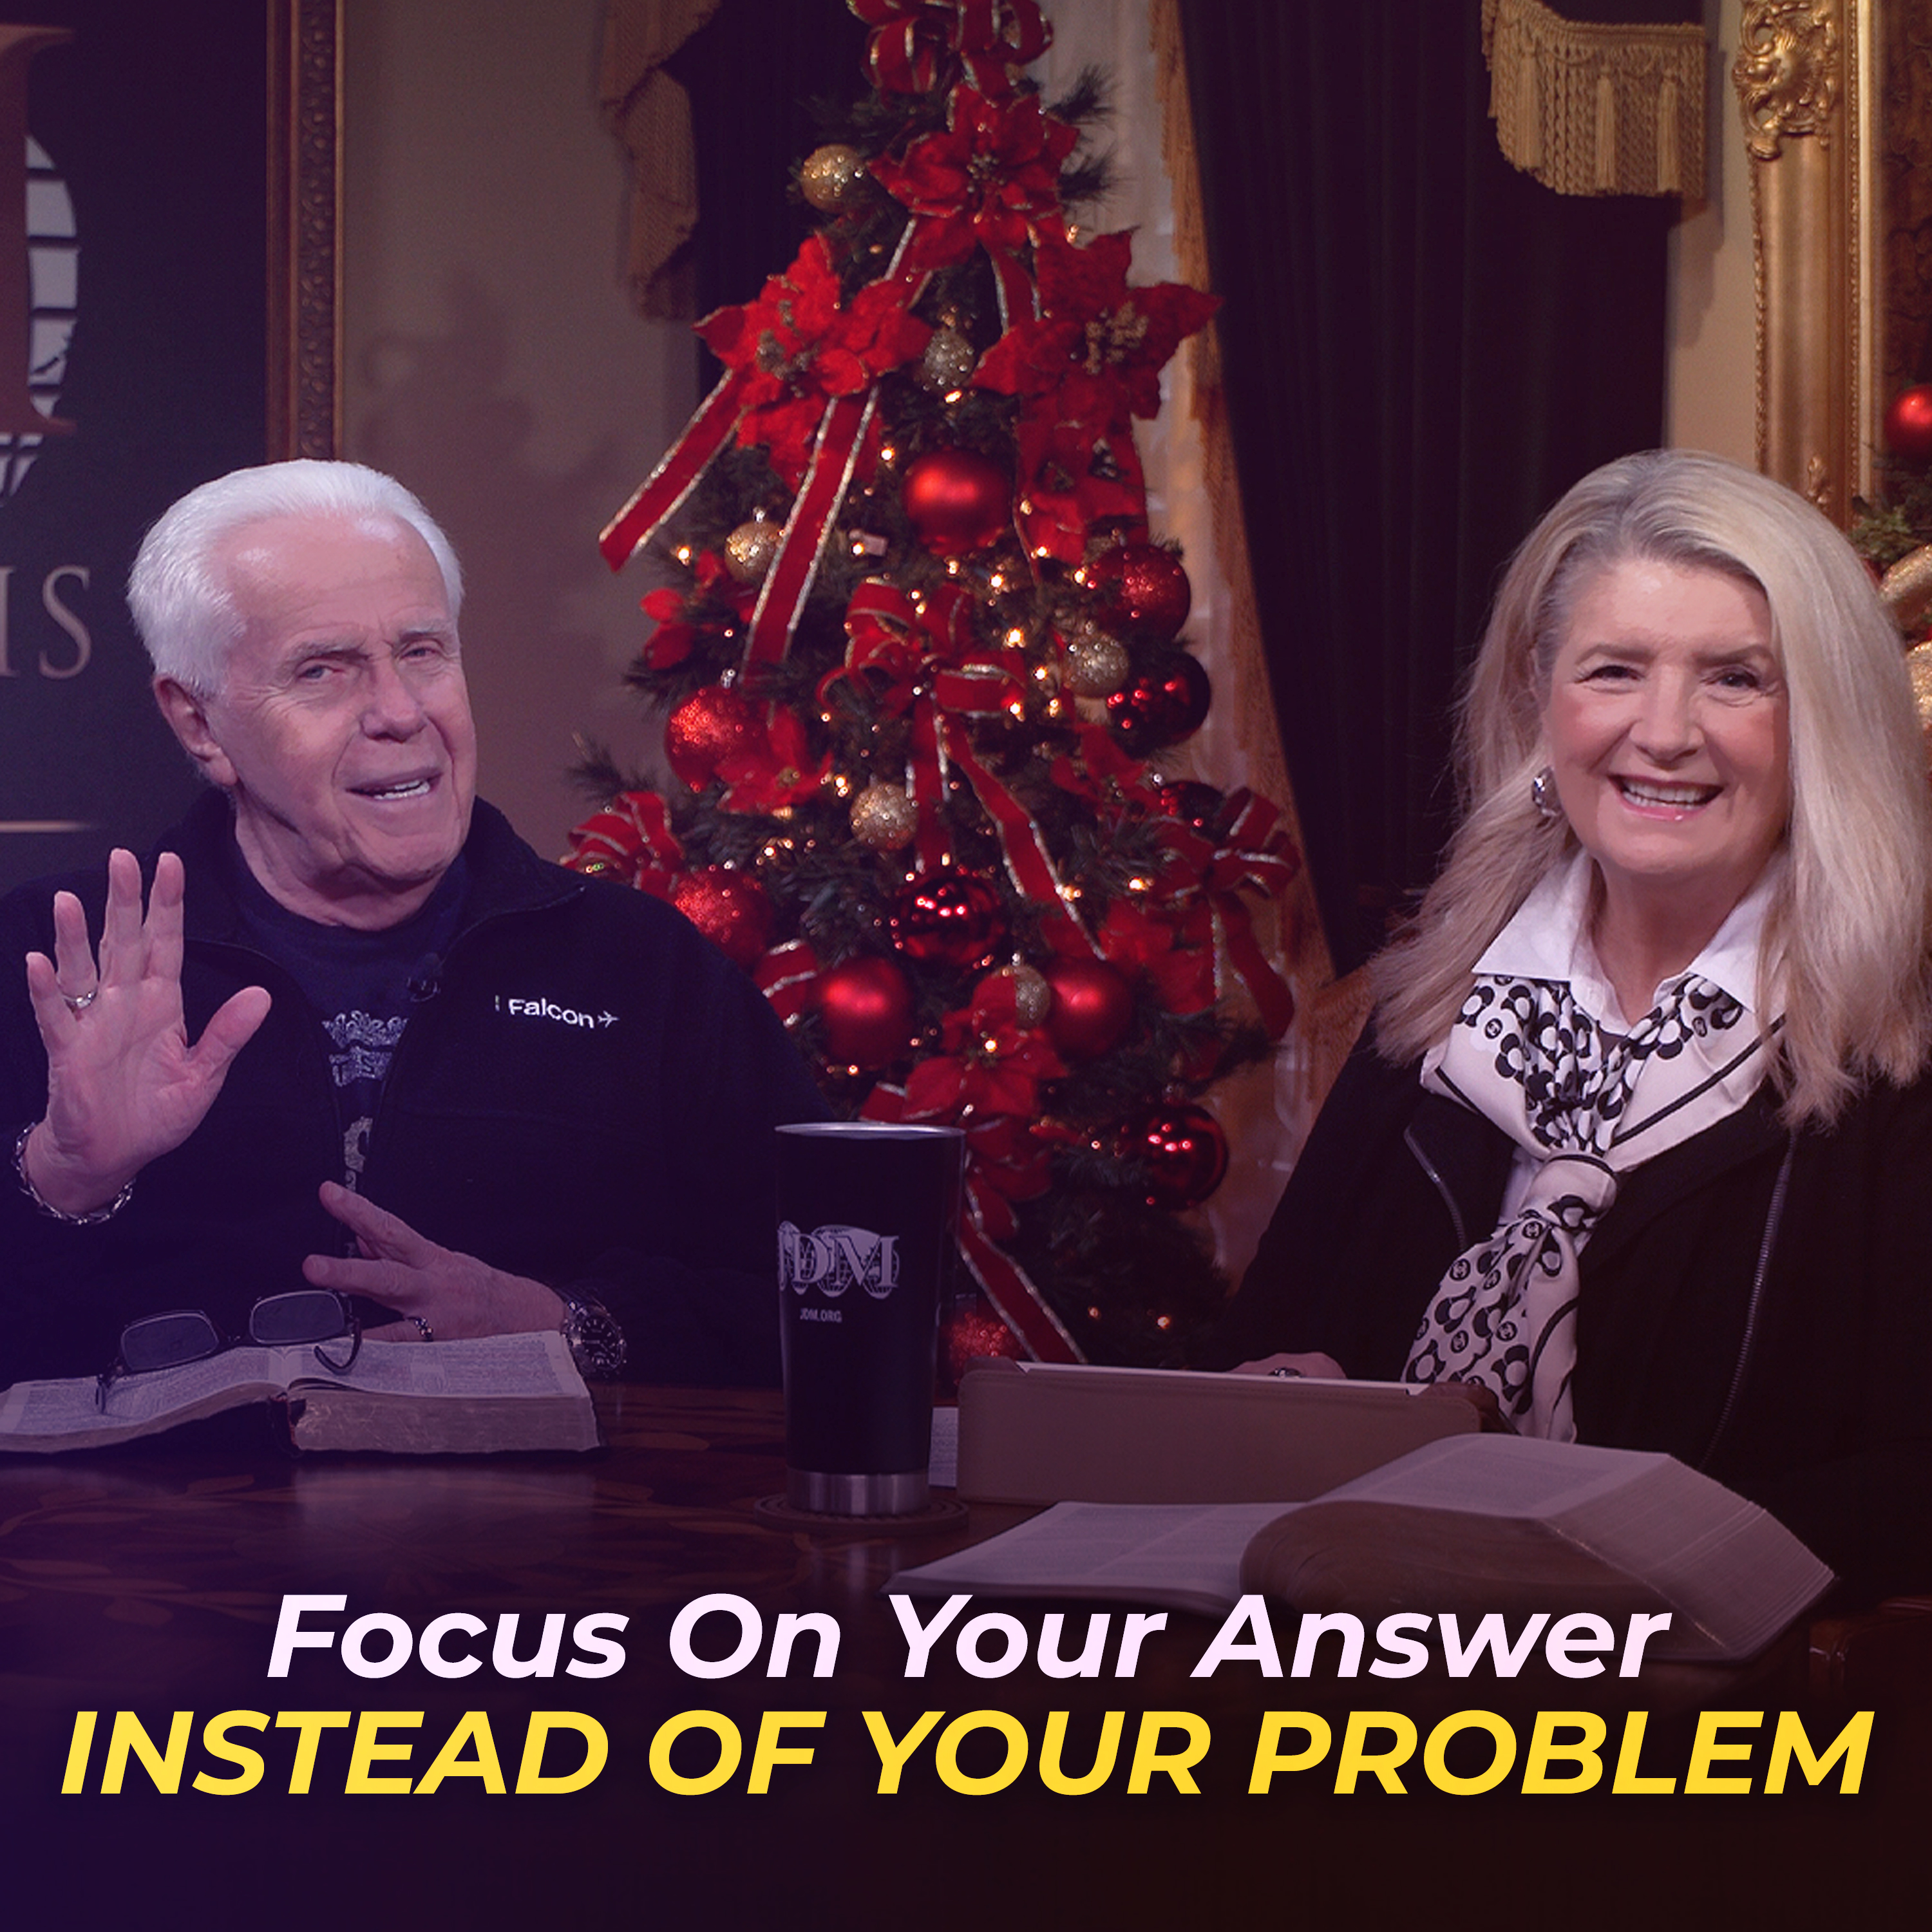 Focus On Your Answer Instead Of Your Problem